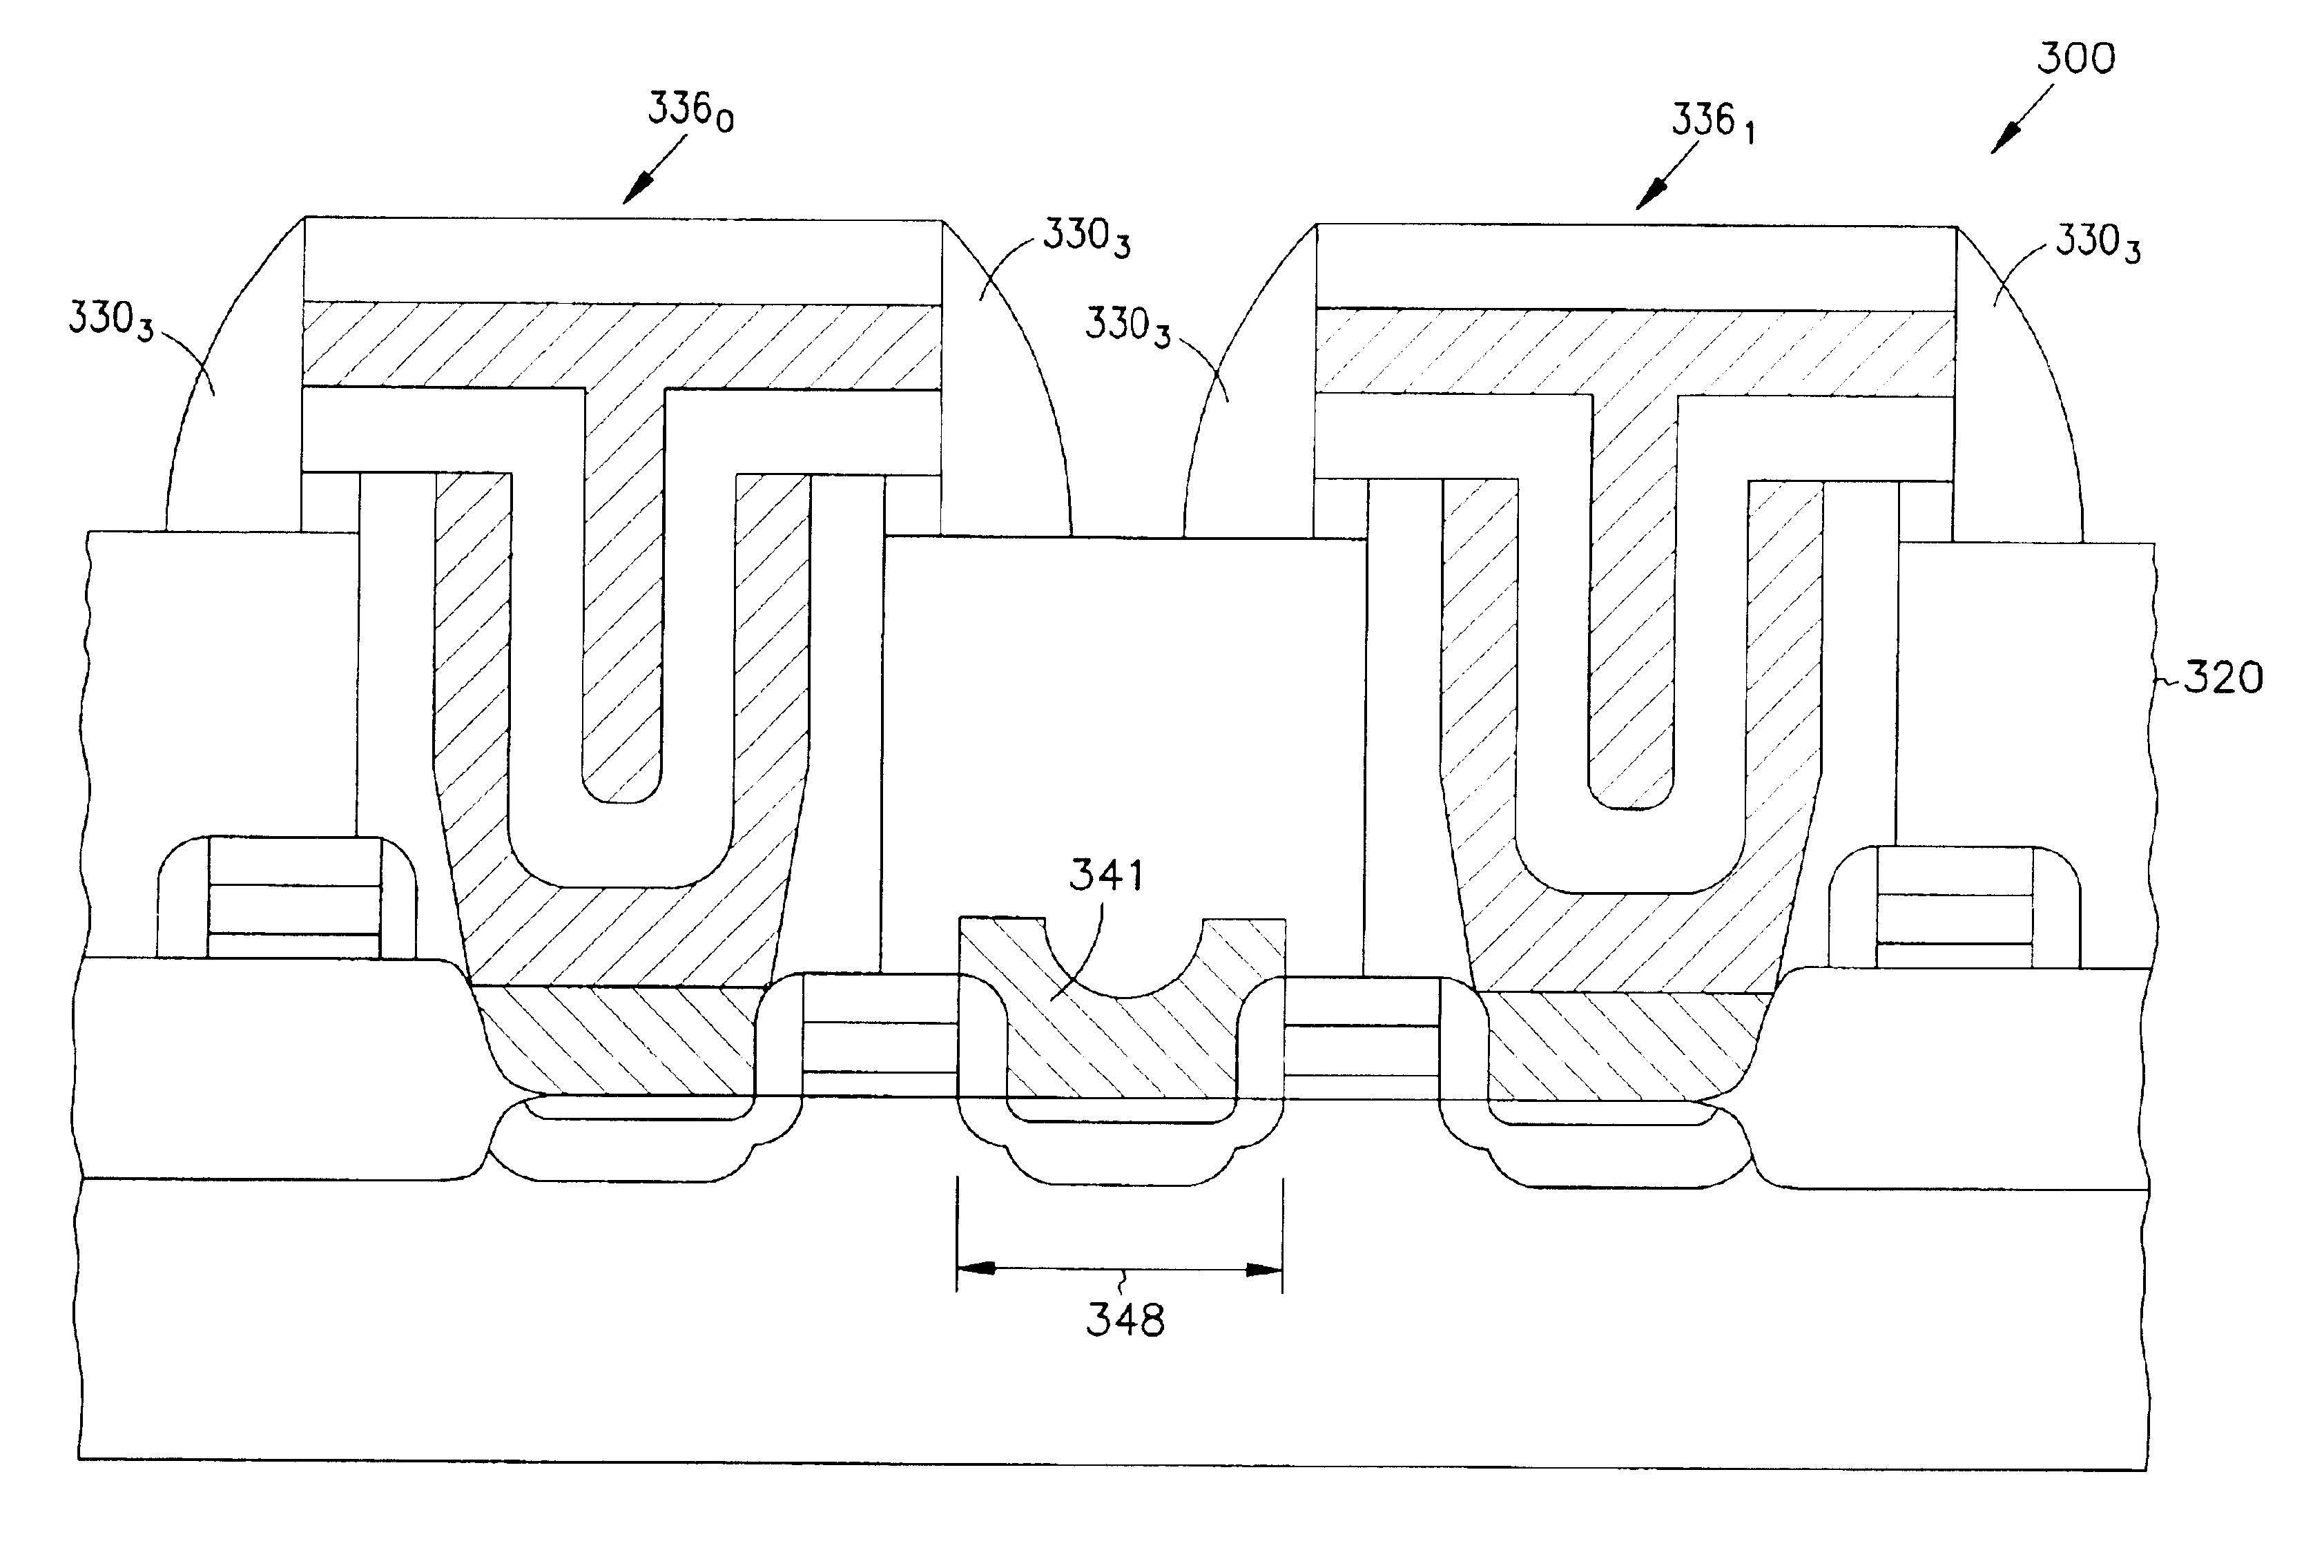 Structures and methods for enhancing capacitors in integrated circuits